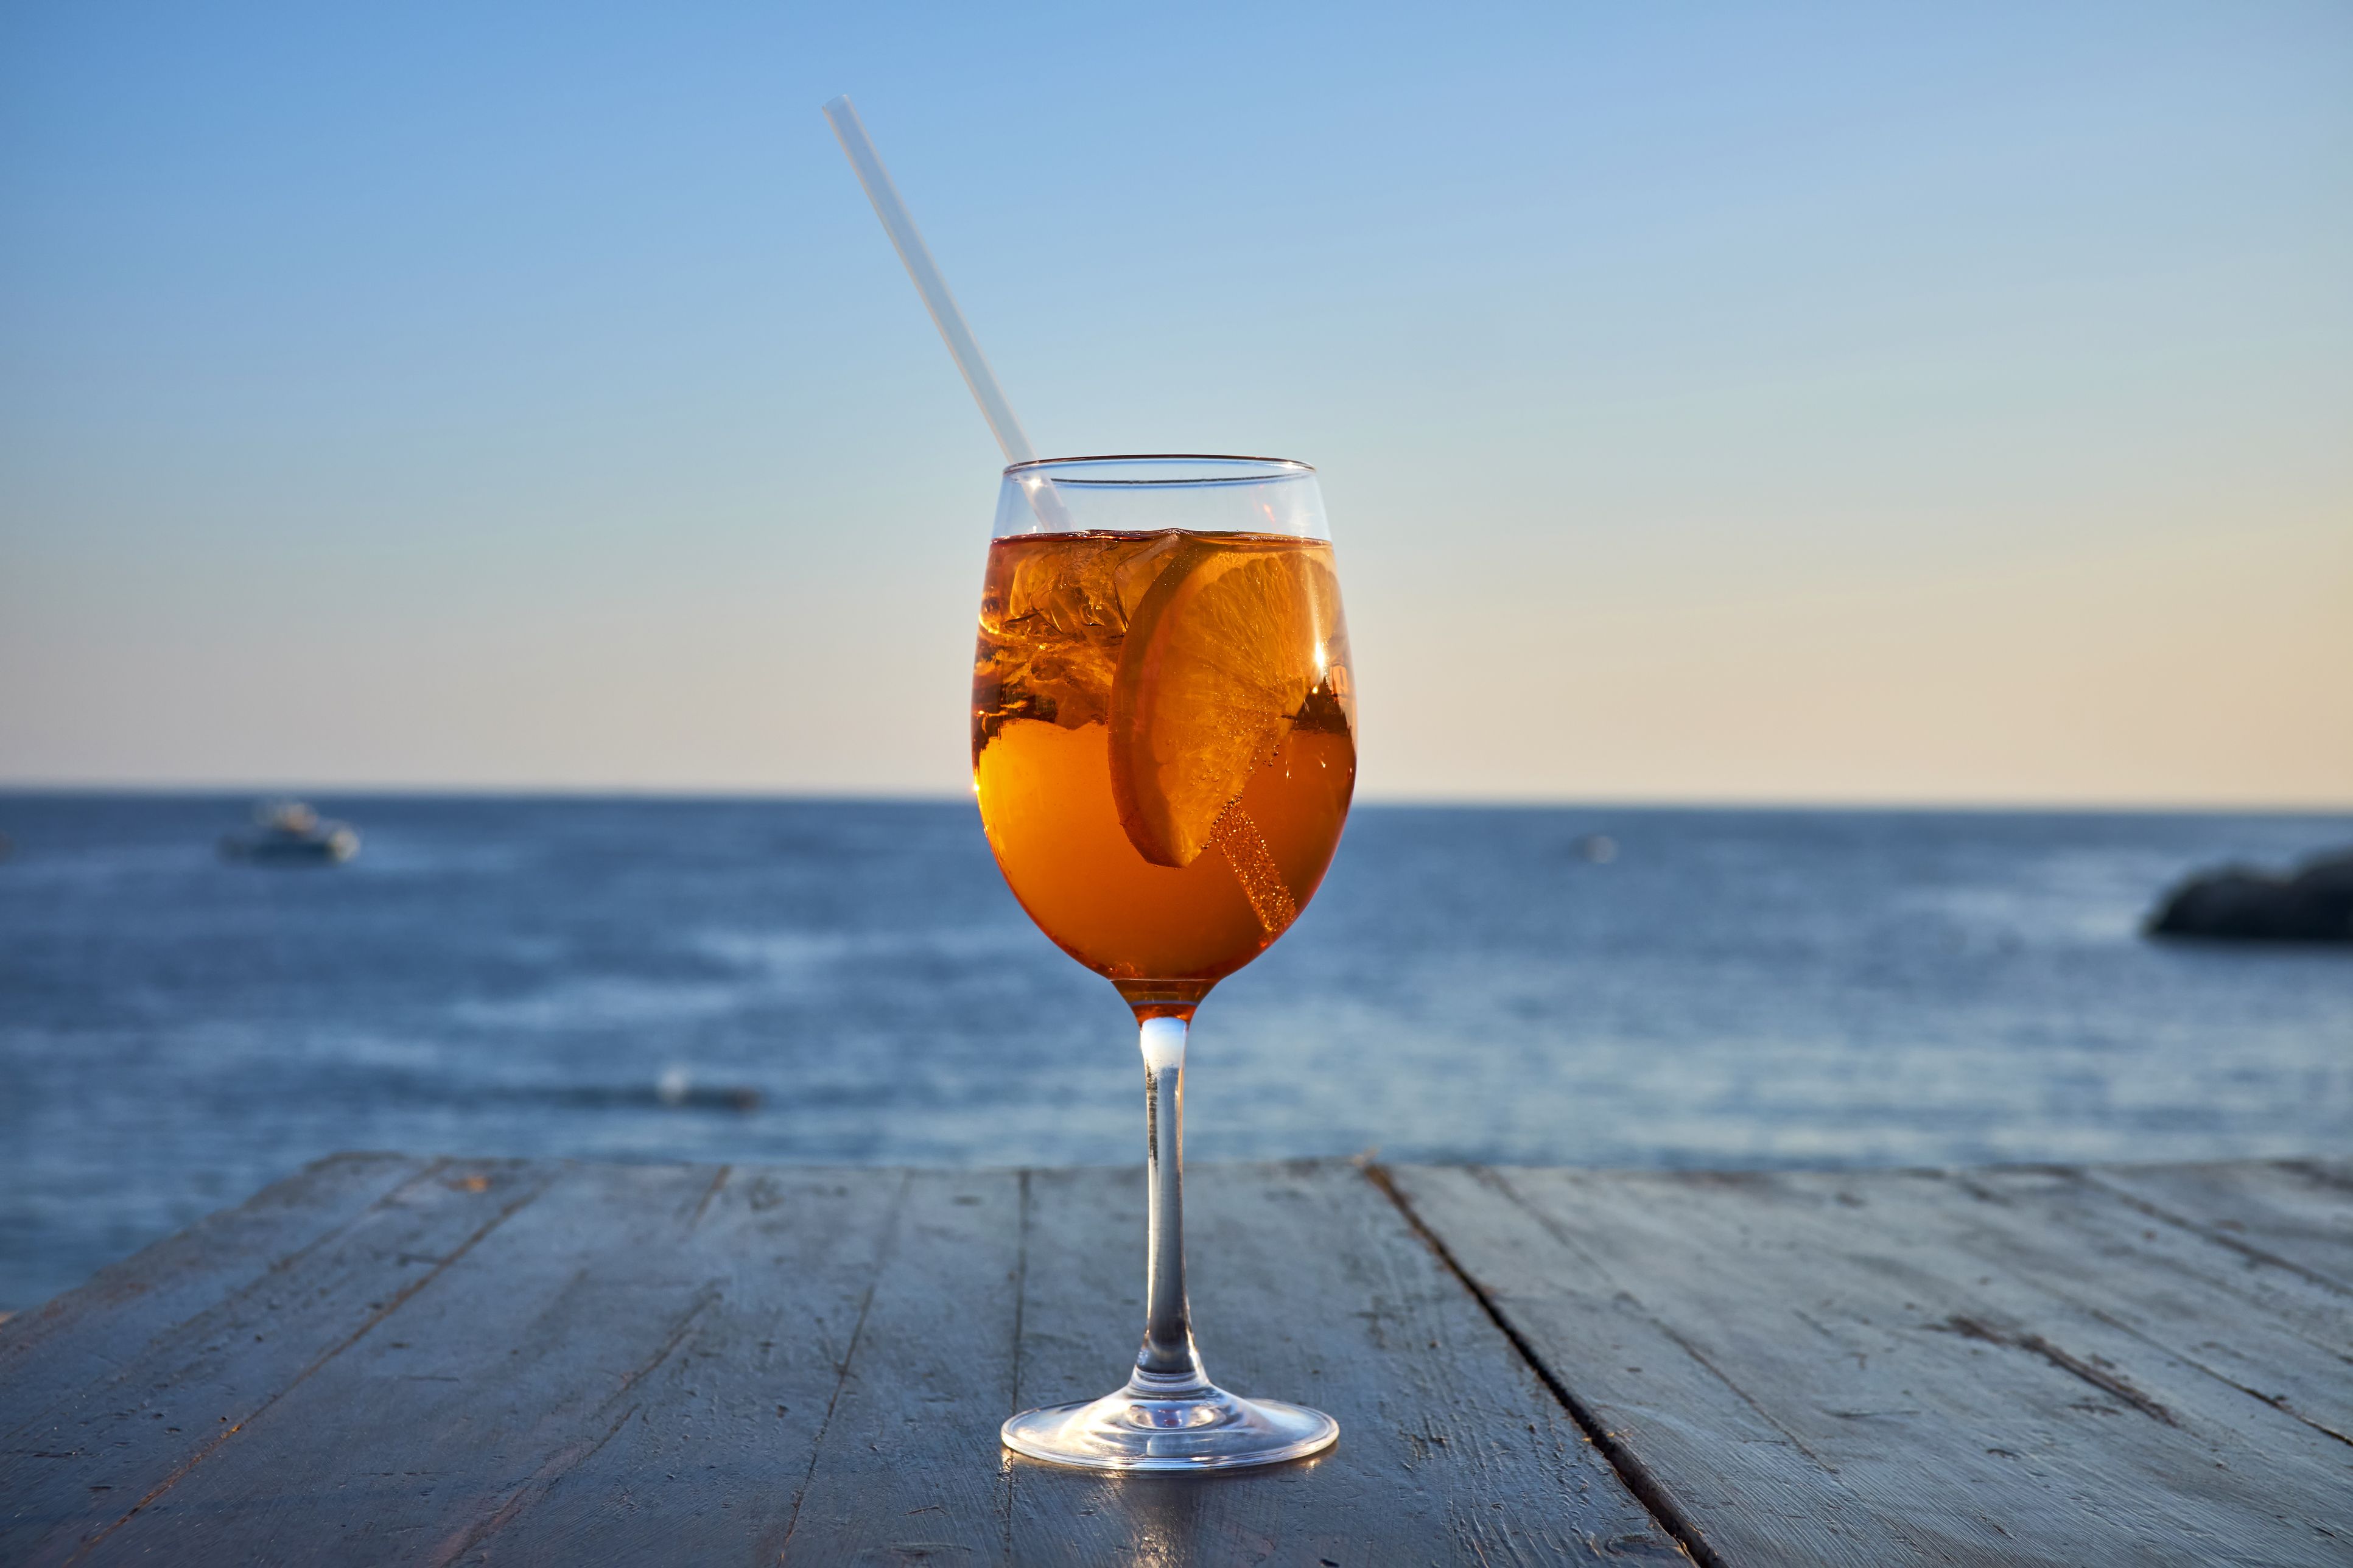 glass-of-ice-cooled-spritz-with-orange-slice-in-royalty-free-image-900233638-1533300393